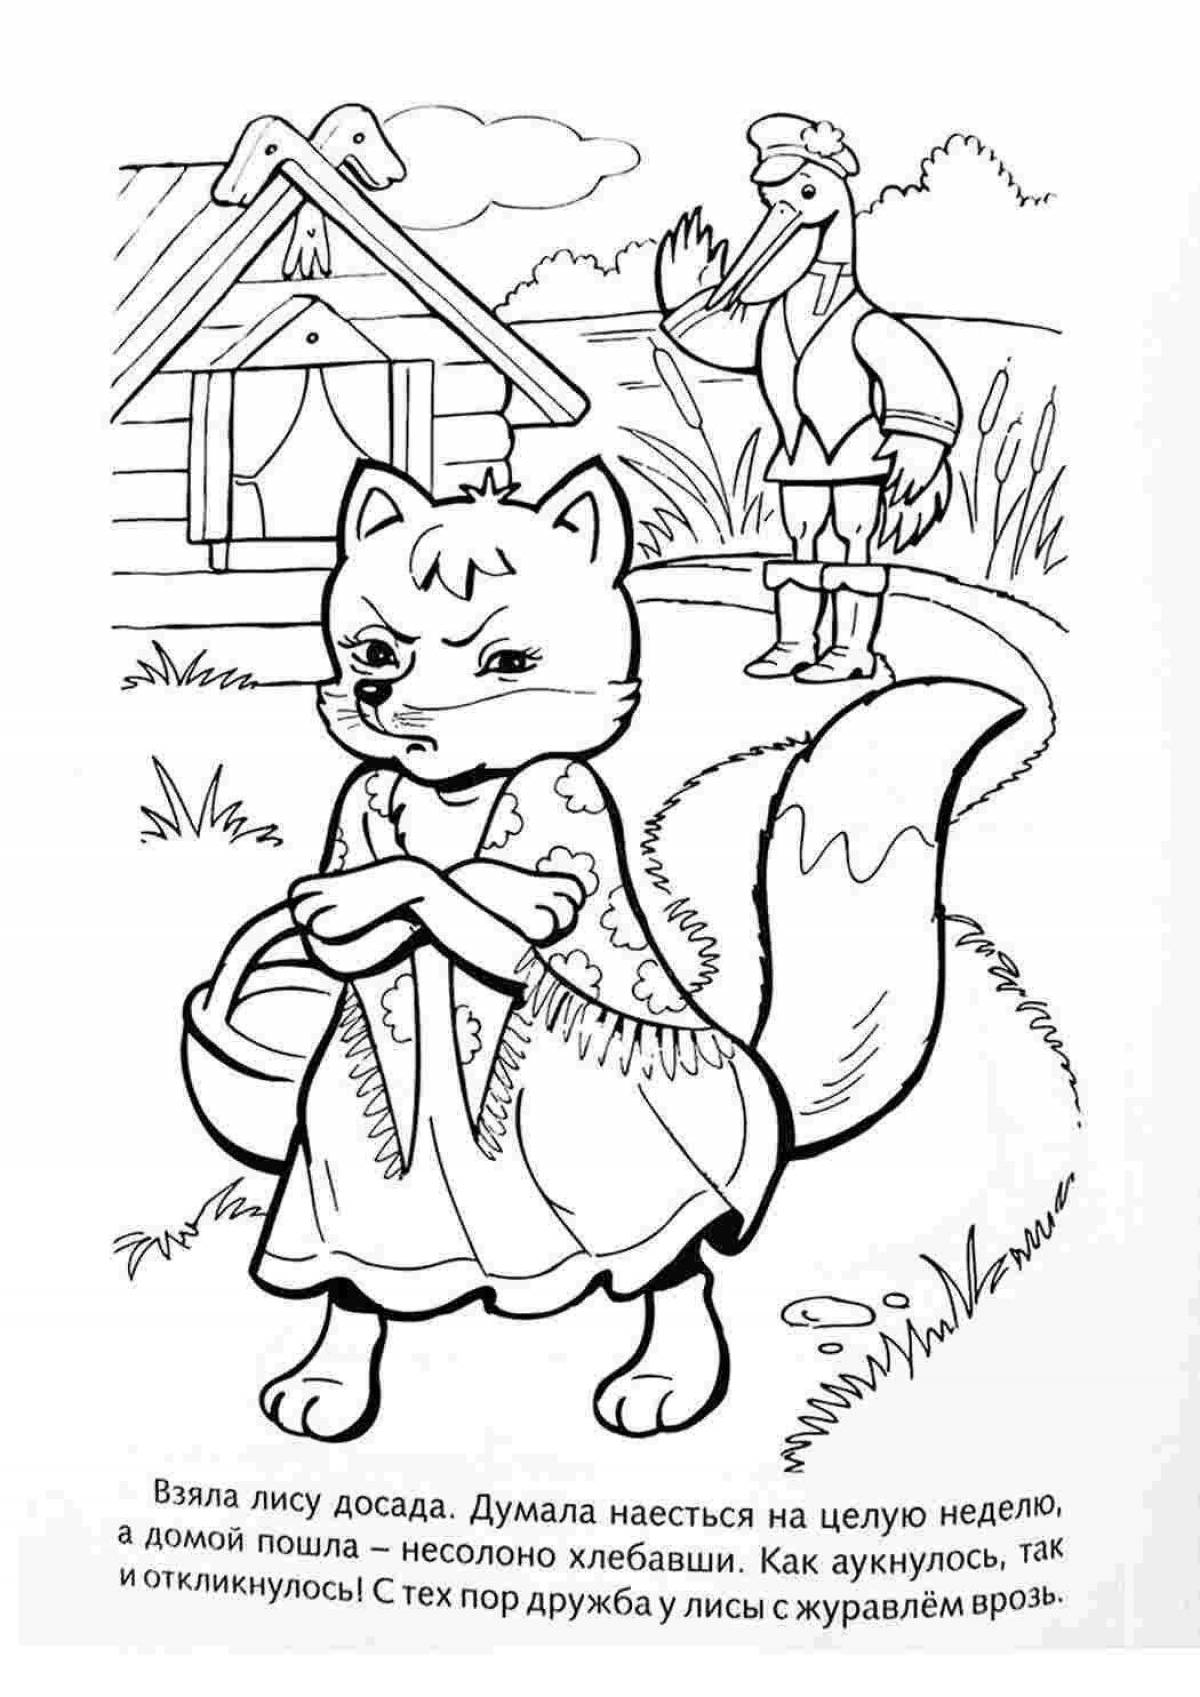 Fun coloring fairytale fox with a rolling pin